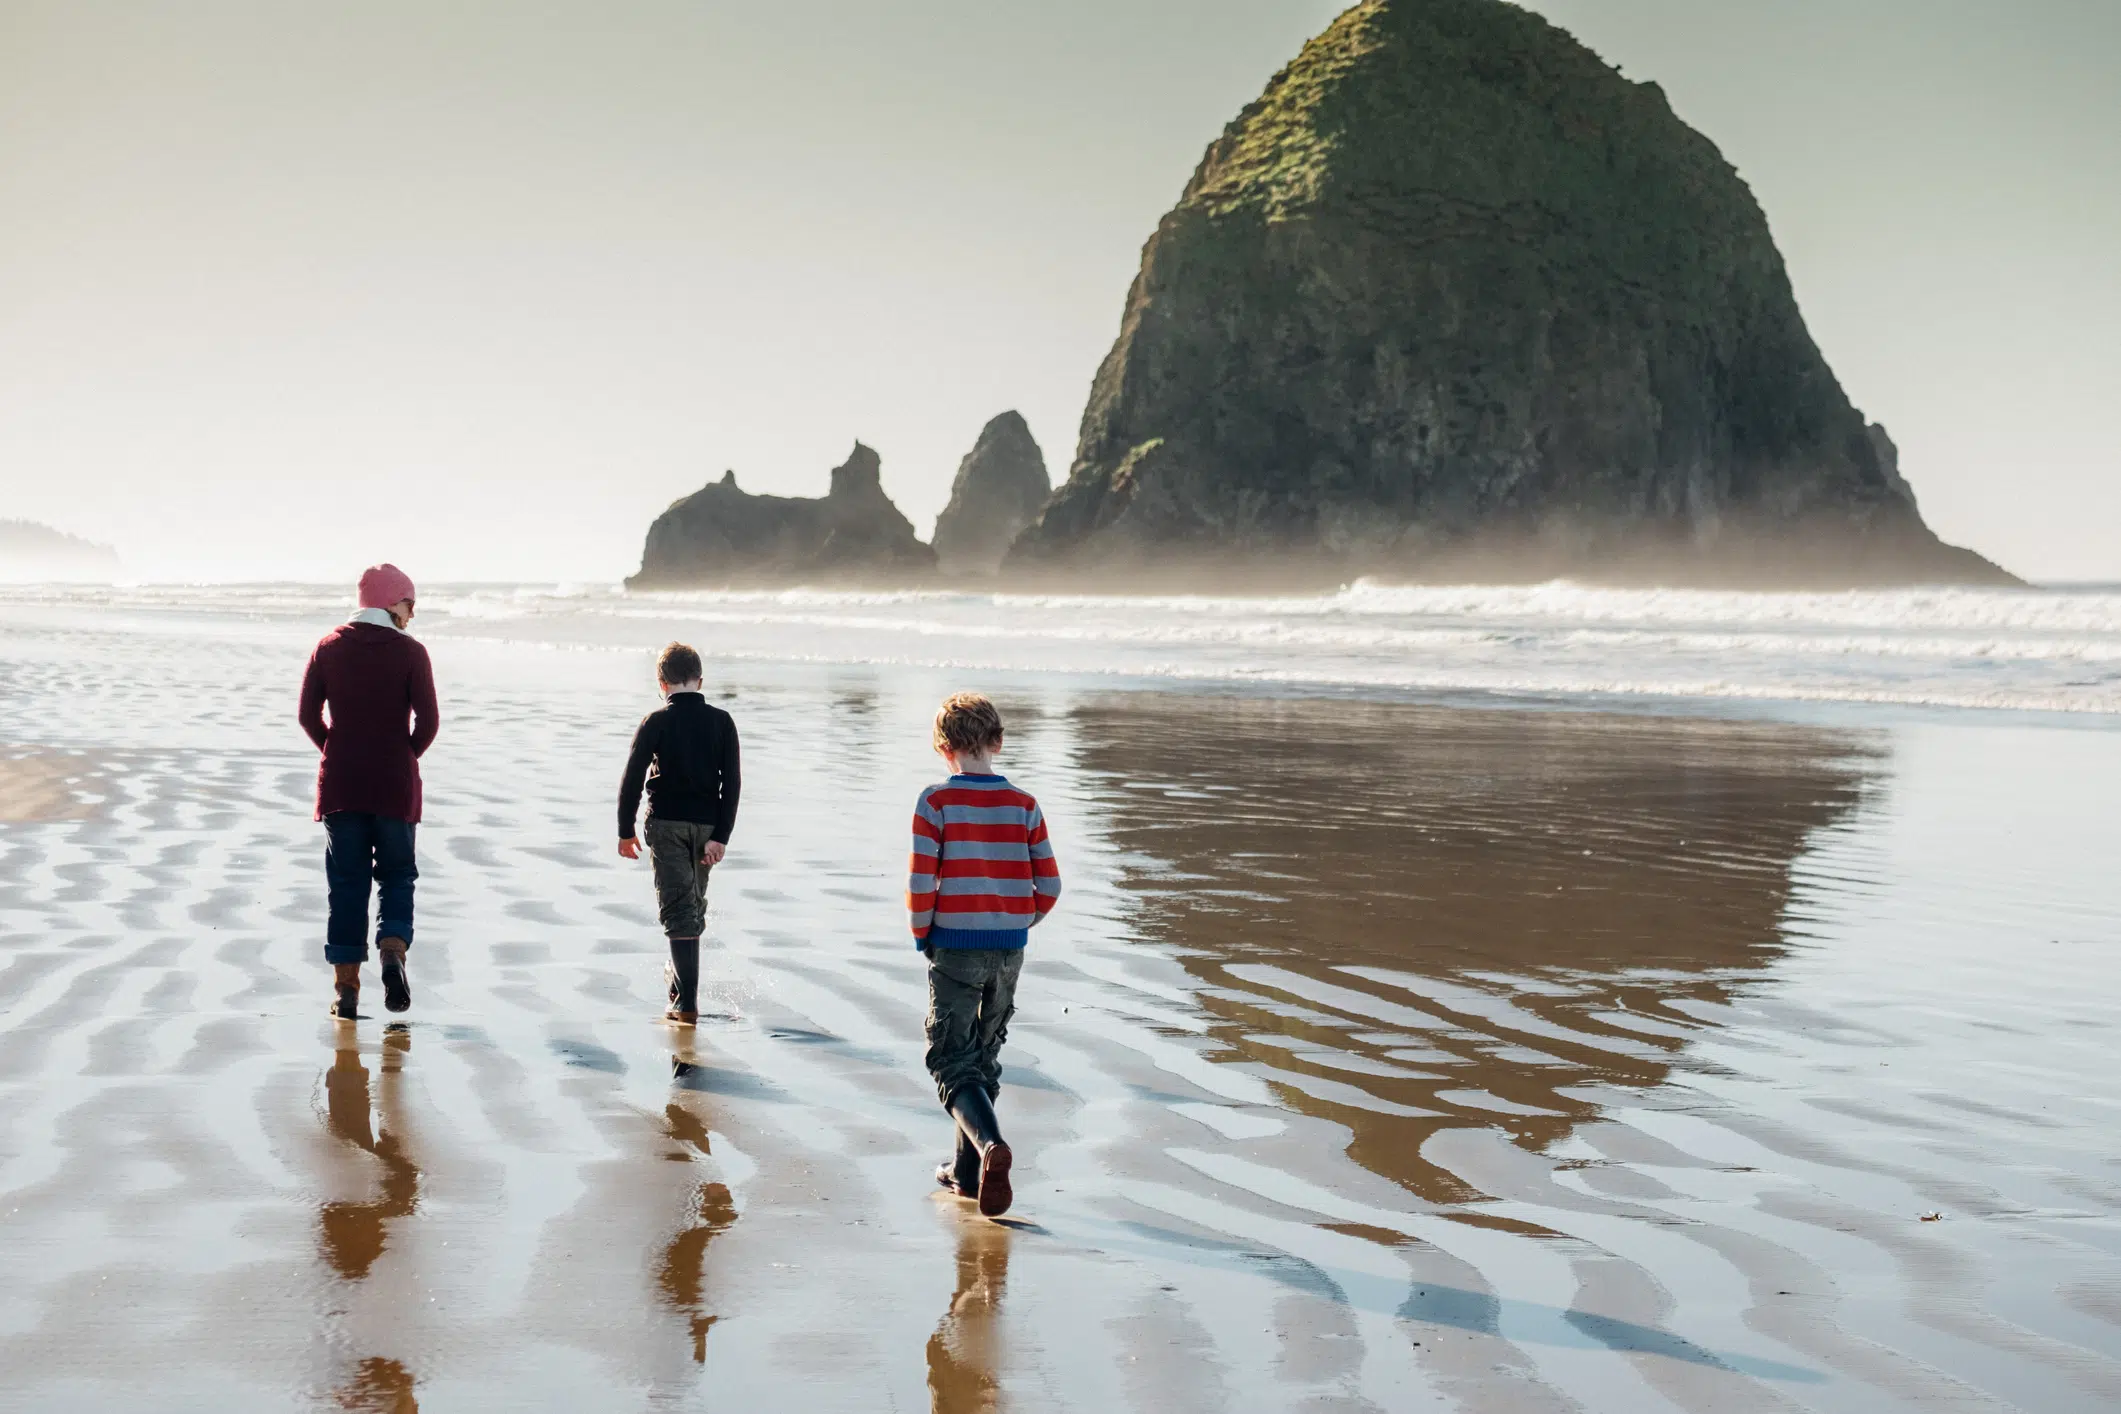 10 Things To Do in Cannon Beach This Summer SPIRIT 105.3